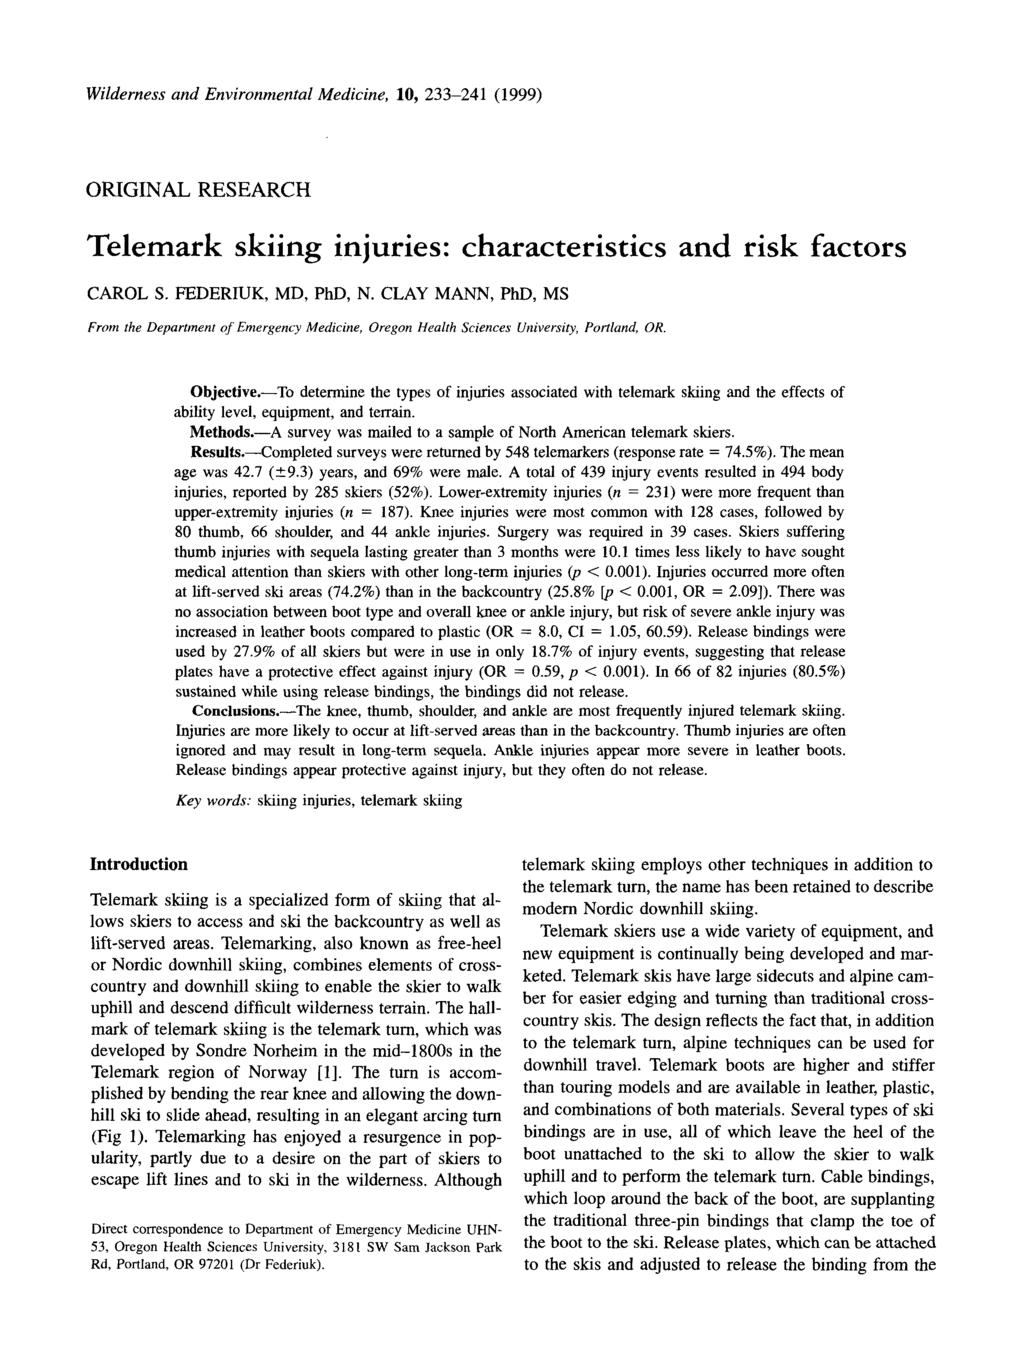 Wilderness and Environmental Medicine, 10, 233-241 (1999) ORIGINAL RESEARCH Telemark skiing injuries: characteristics and risk factors CAROL S. FEDERIUK, MD, PhD, N.